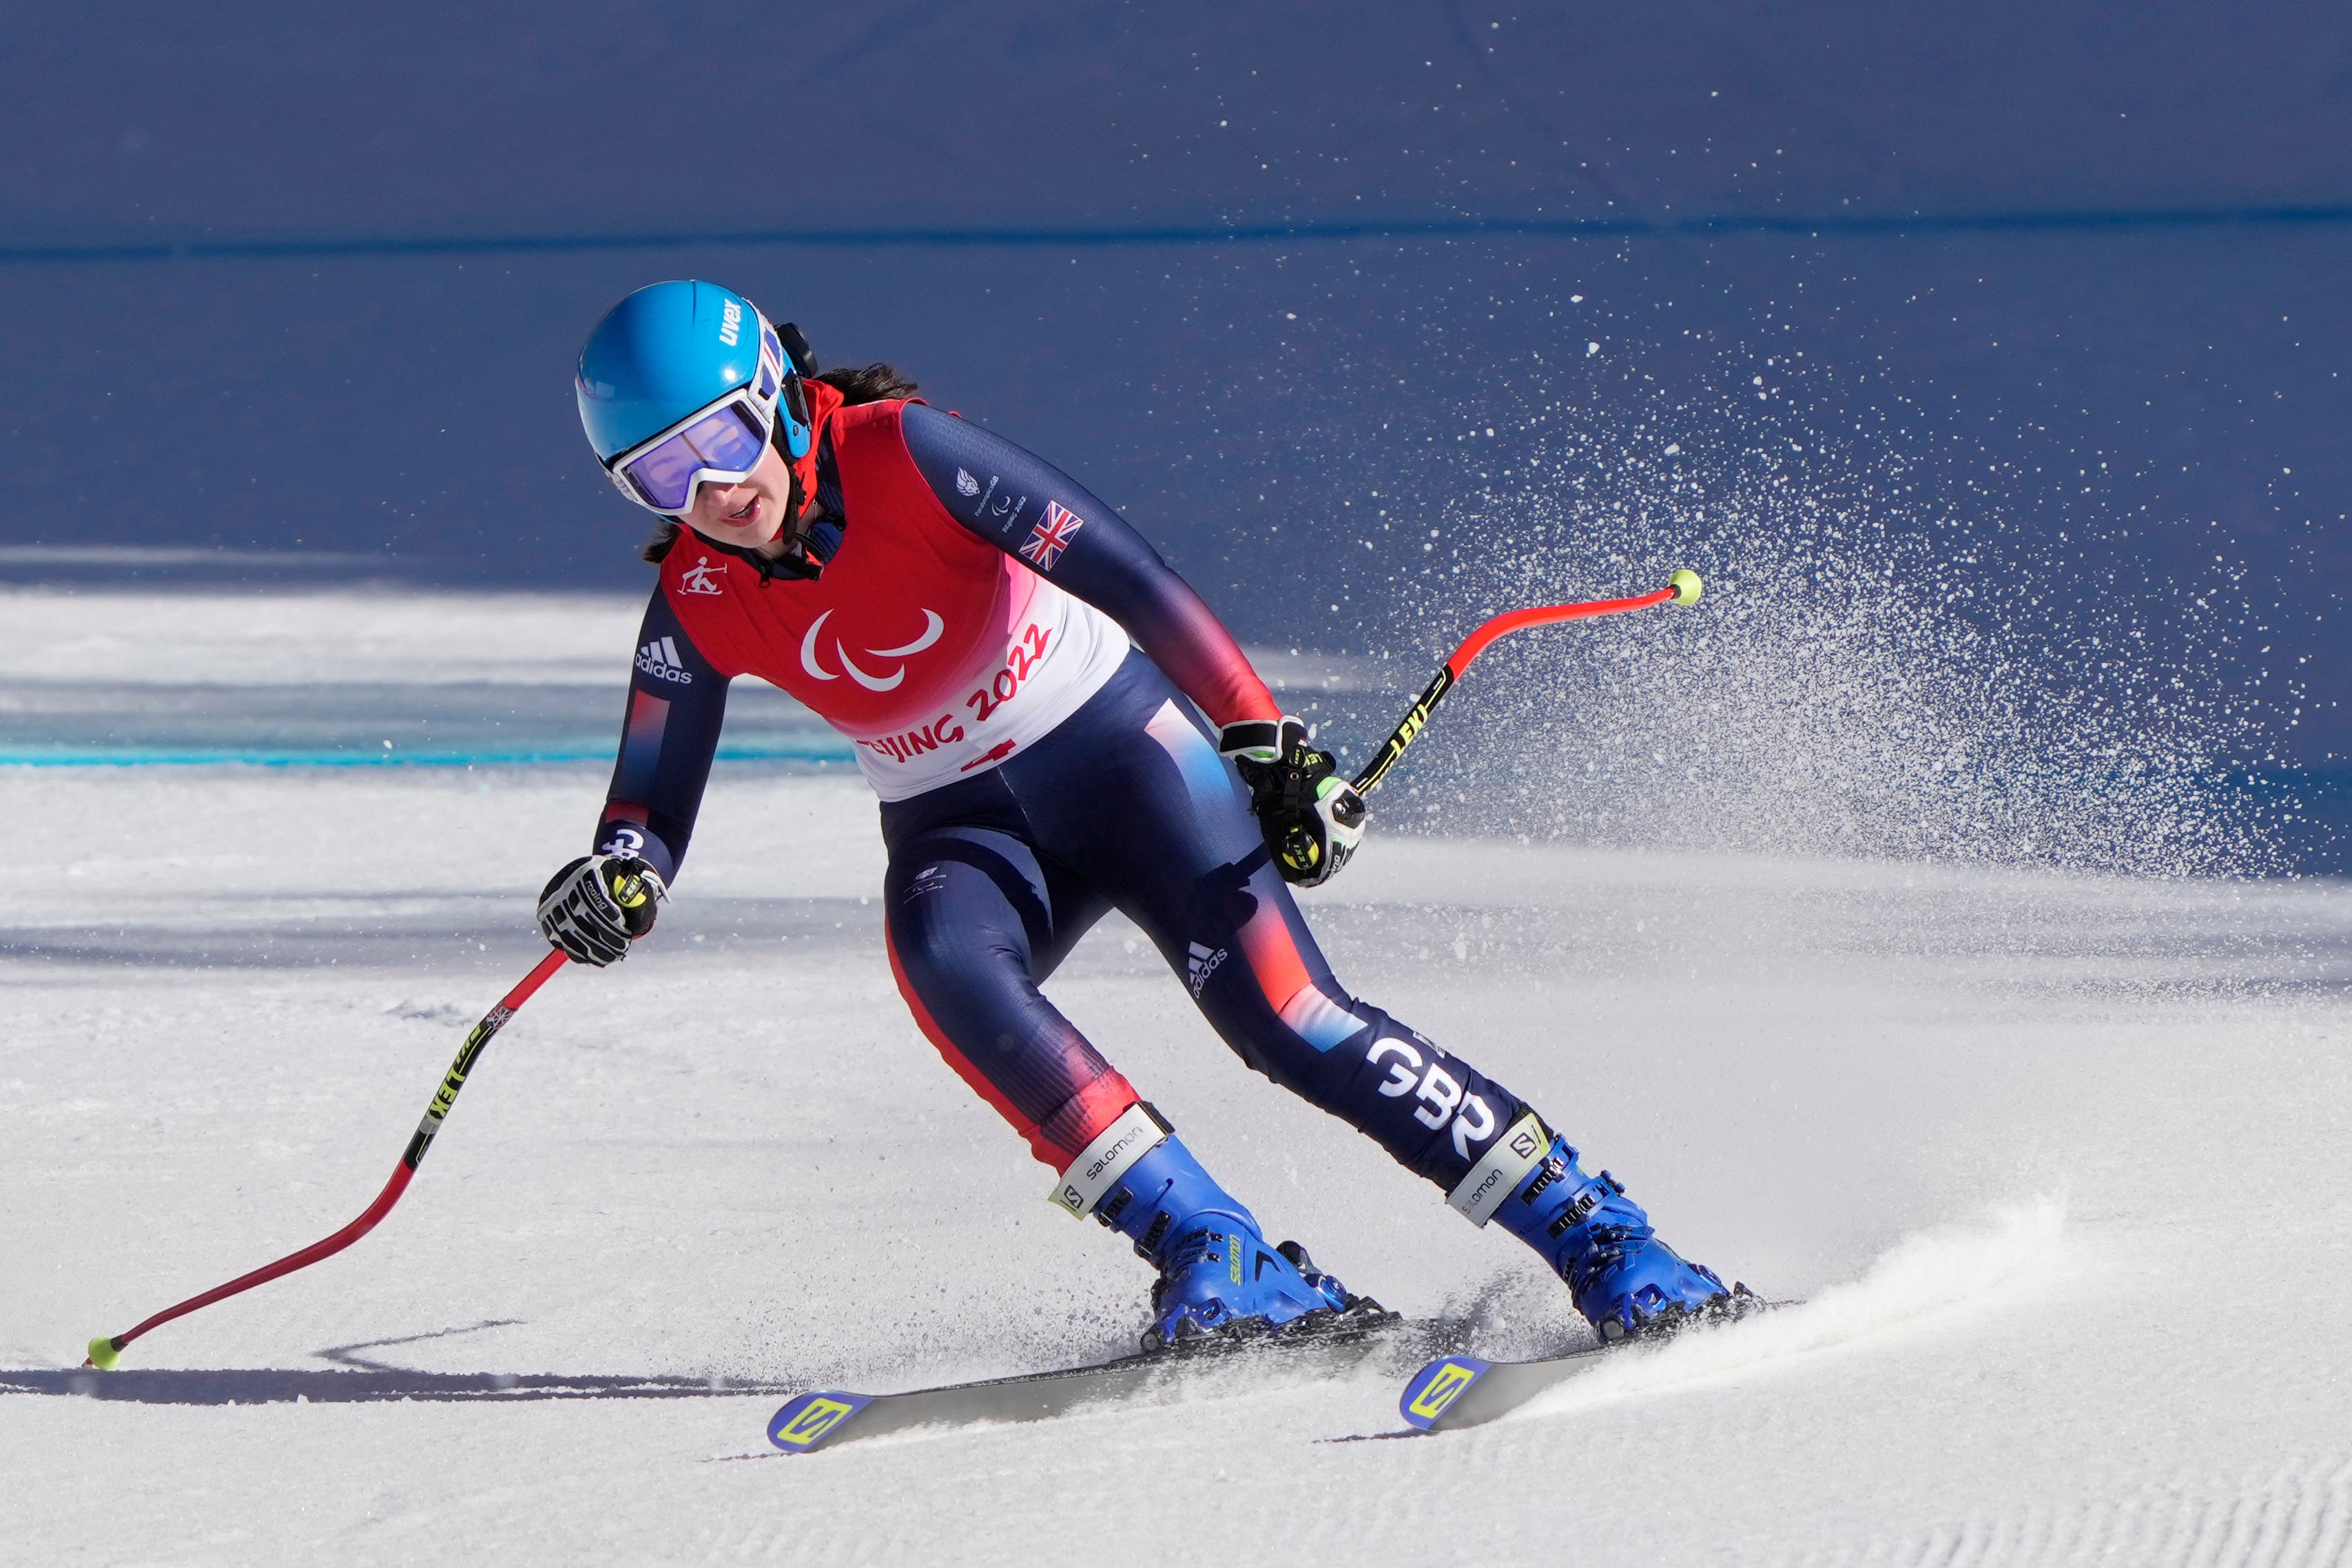 Menna Fitzpatrick on her way to bronze in the women’s Super Combined (Andy Wong/AP)